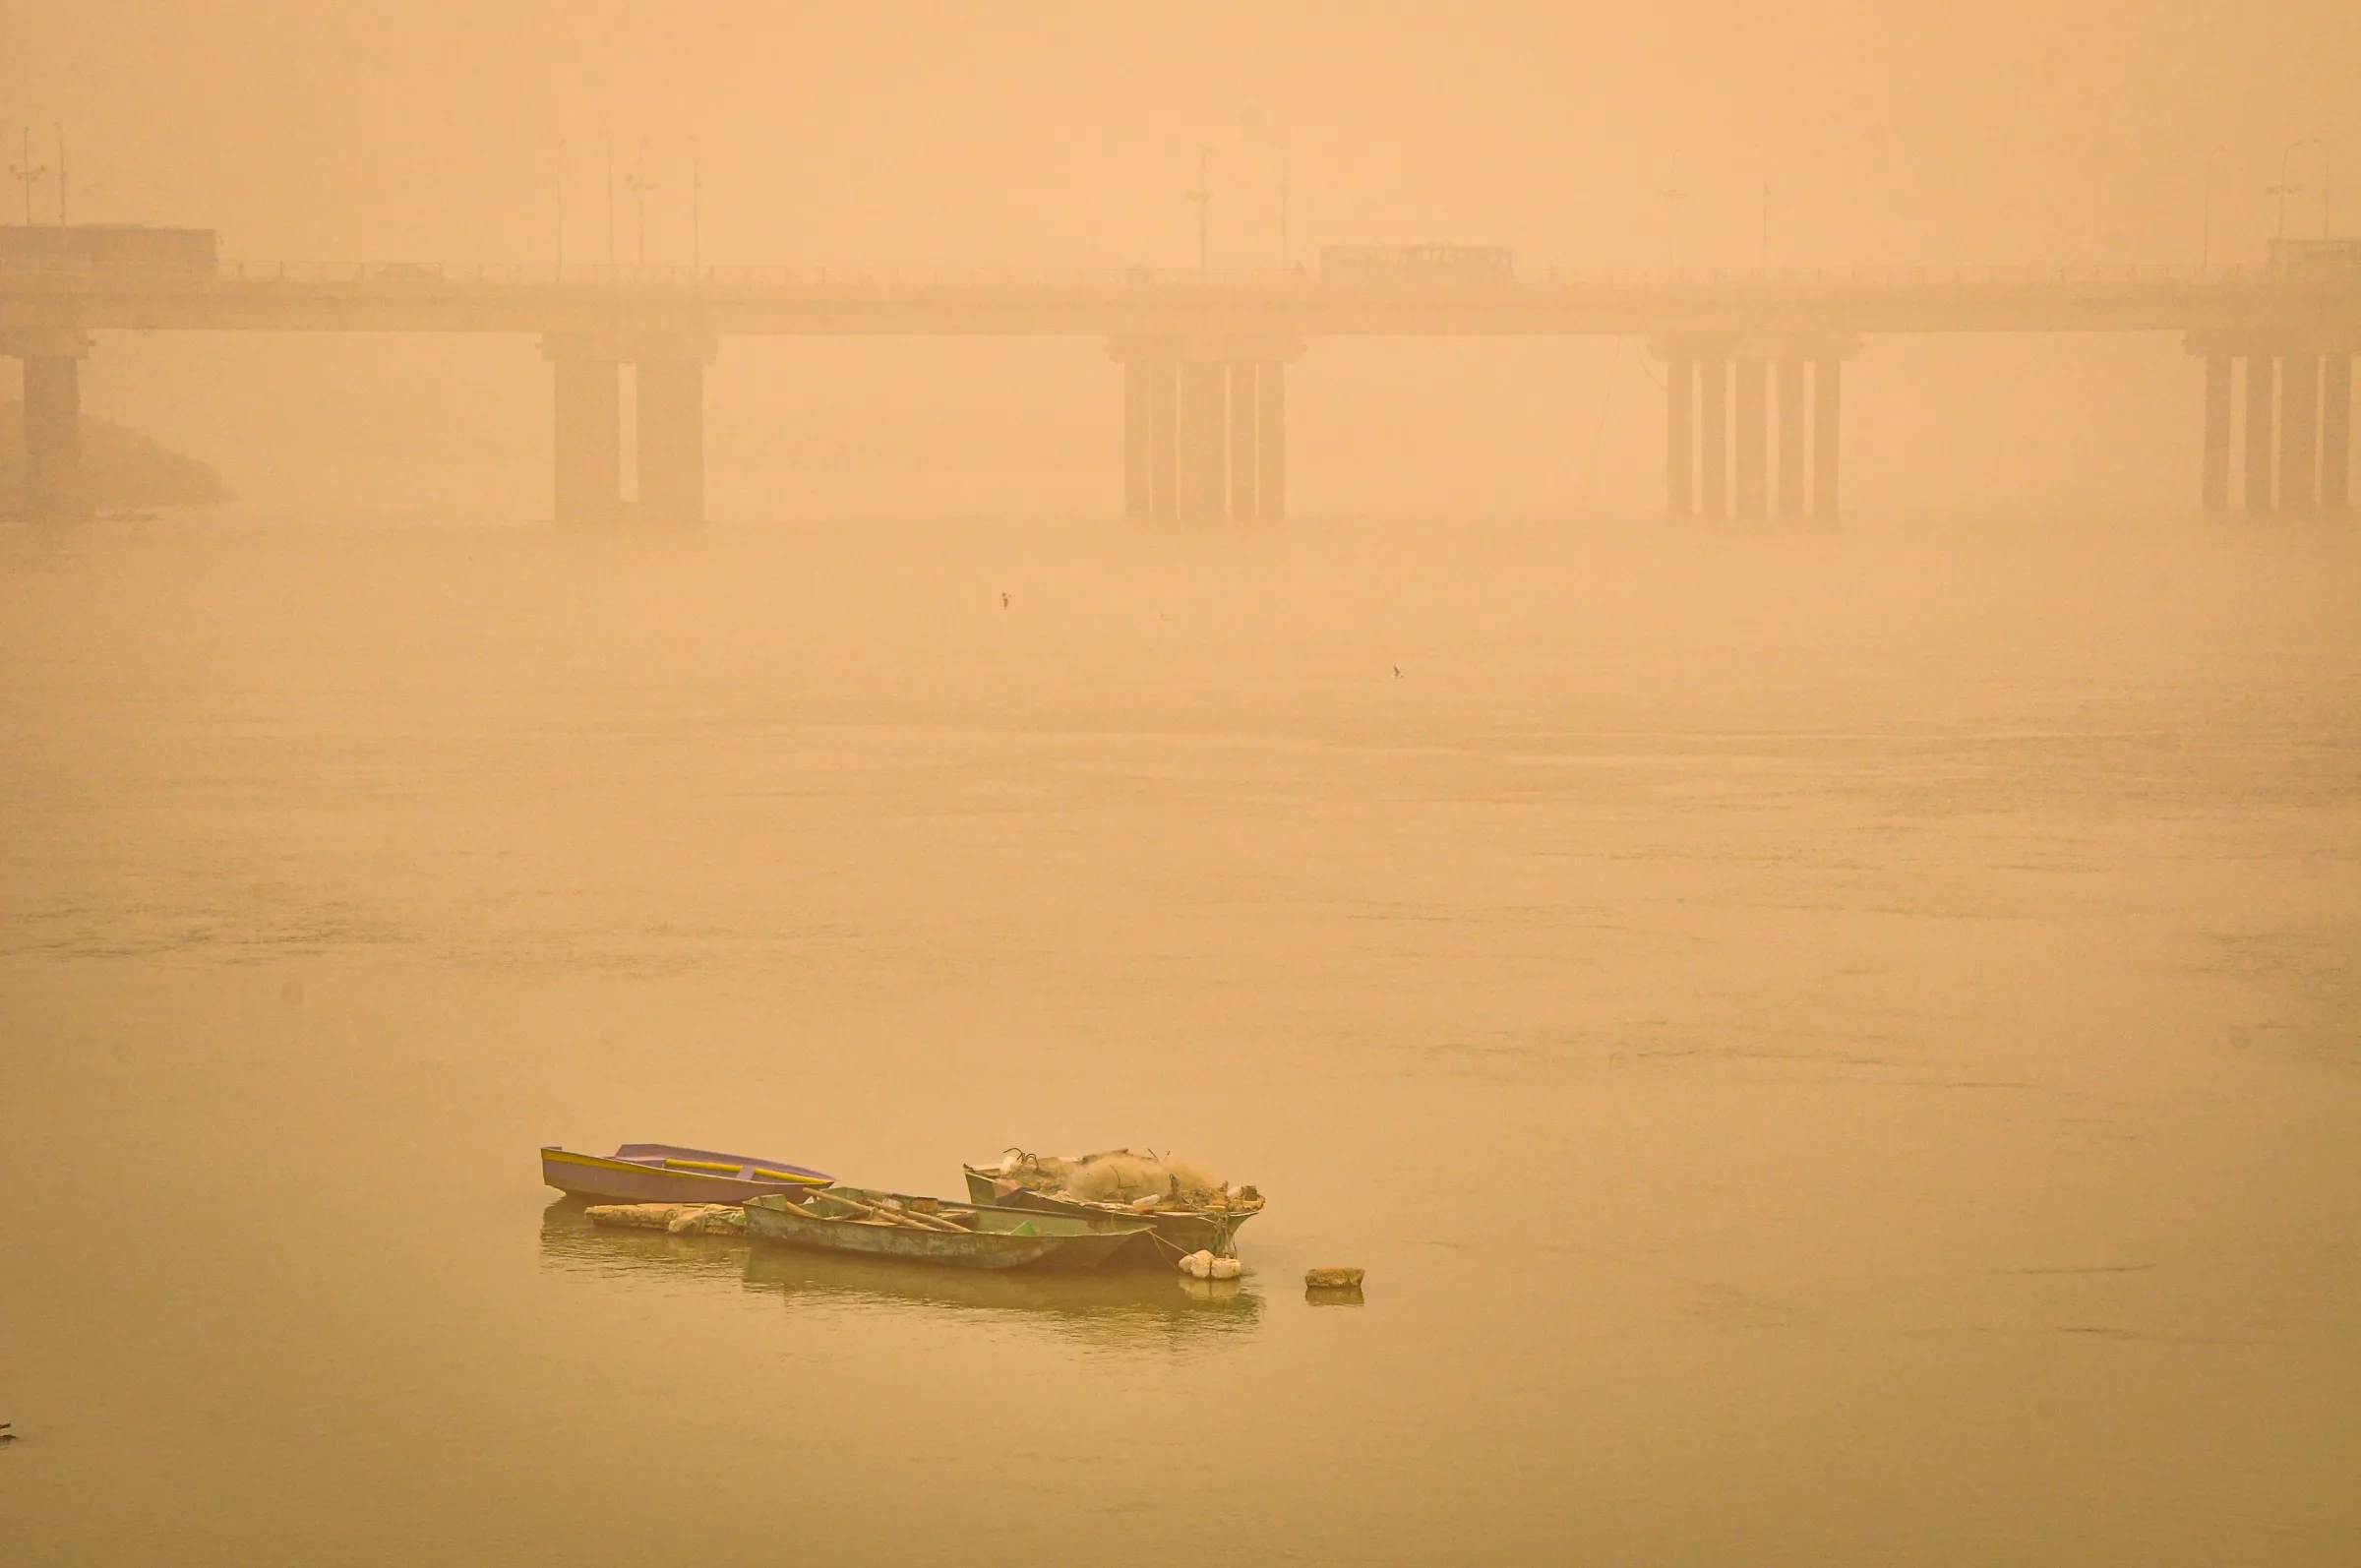 Boats on the Karun river blanketed in a thick haze during one of the increasingly frequent and intense sand and dust storms hitting the Middle East